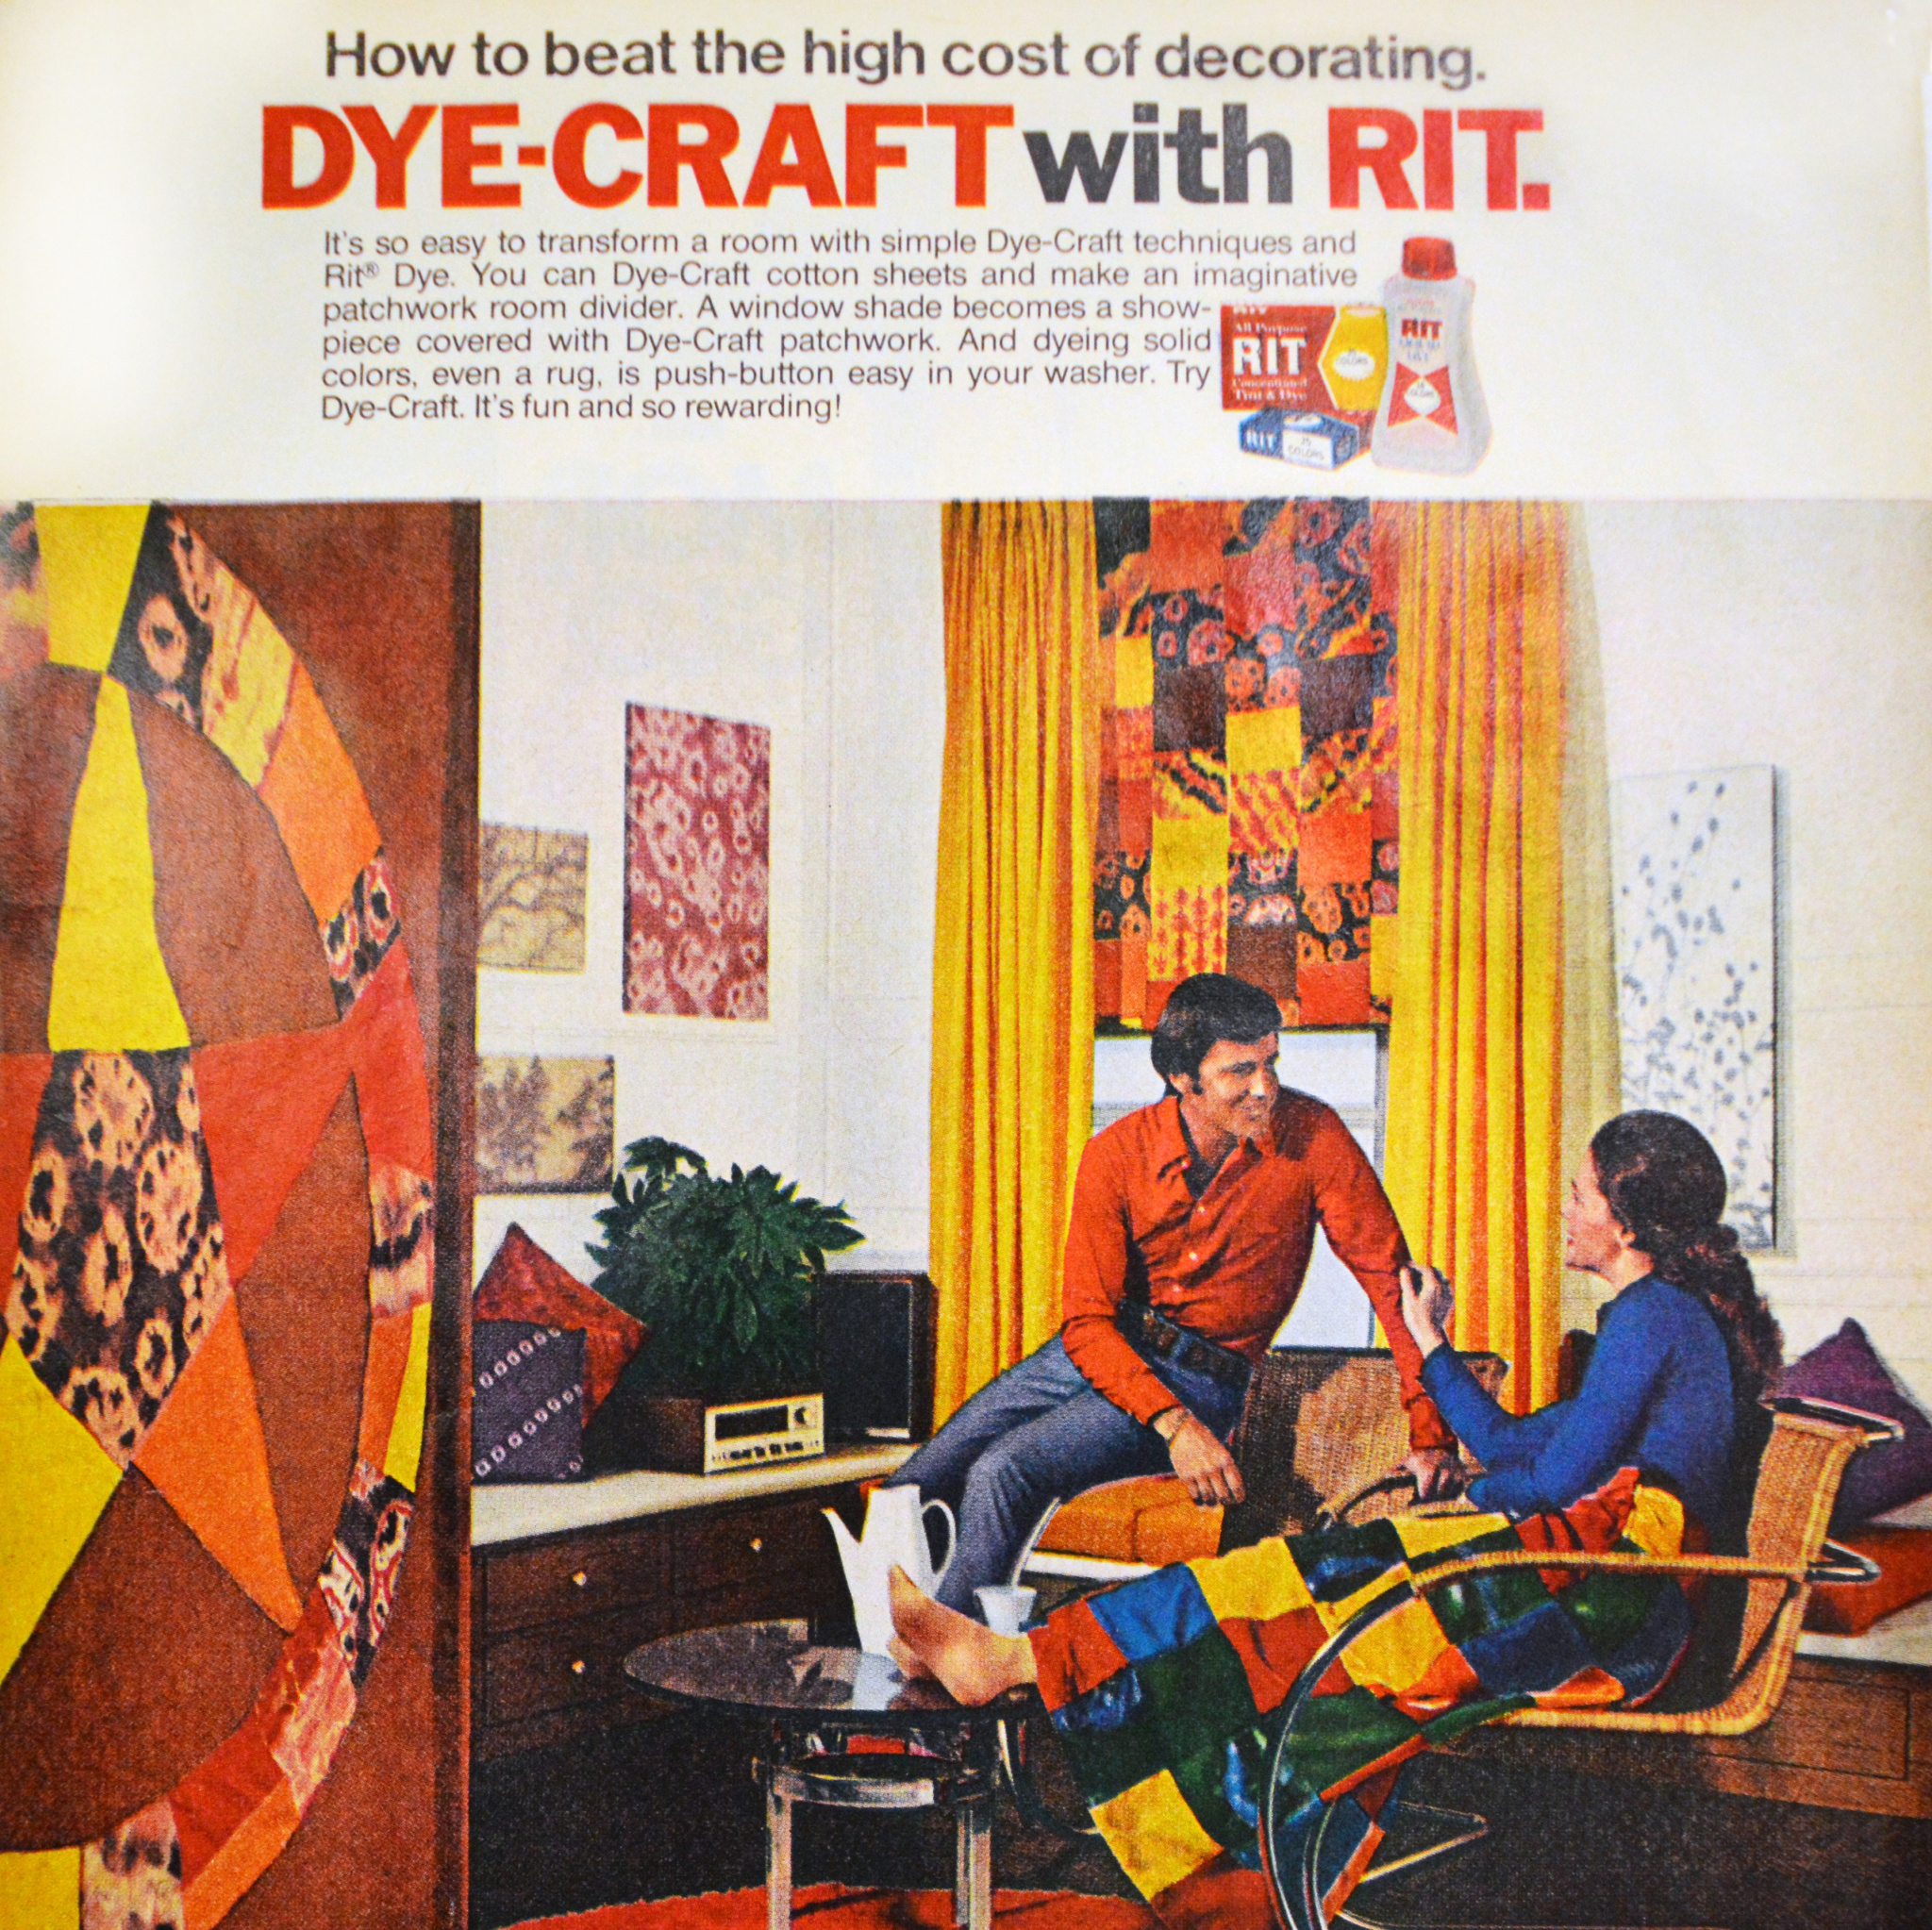 Vintage Rit ad, "Dye-Craft with Rit" living room with tie-dyed pieces.